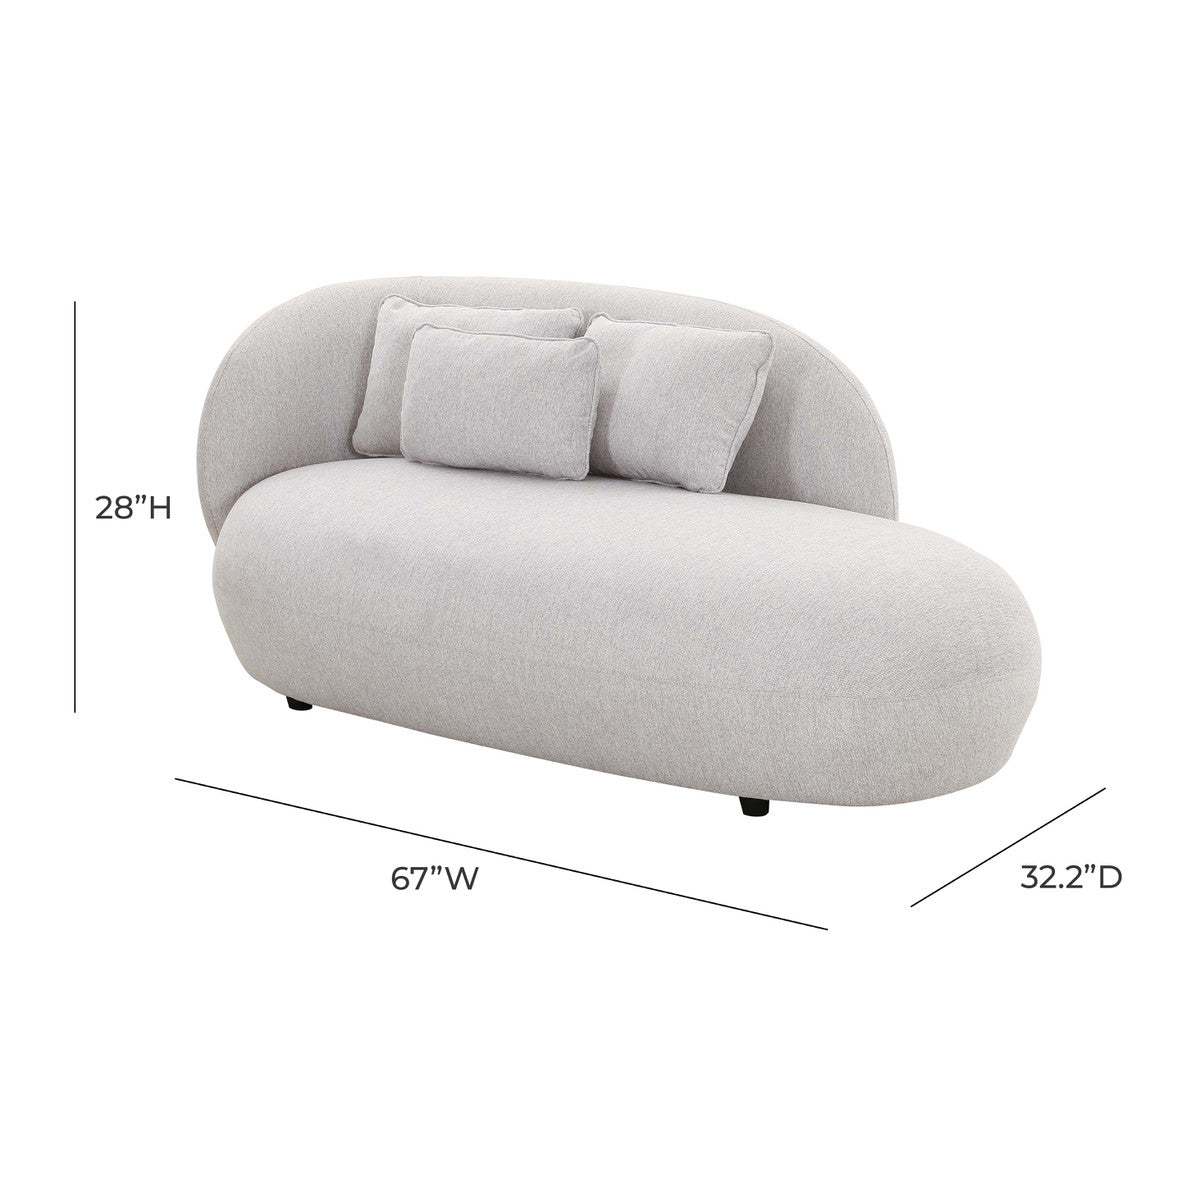 Tallie Grey Velvet Chaise - Luxury Living Collection